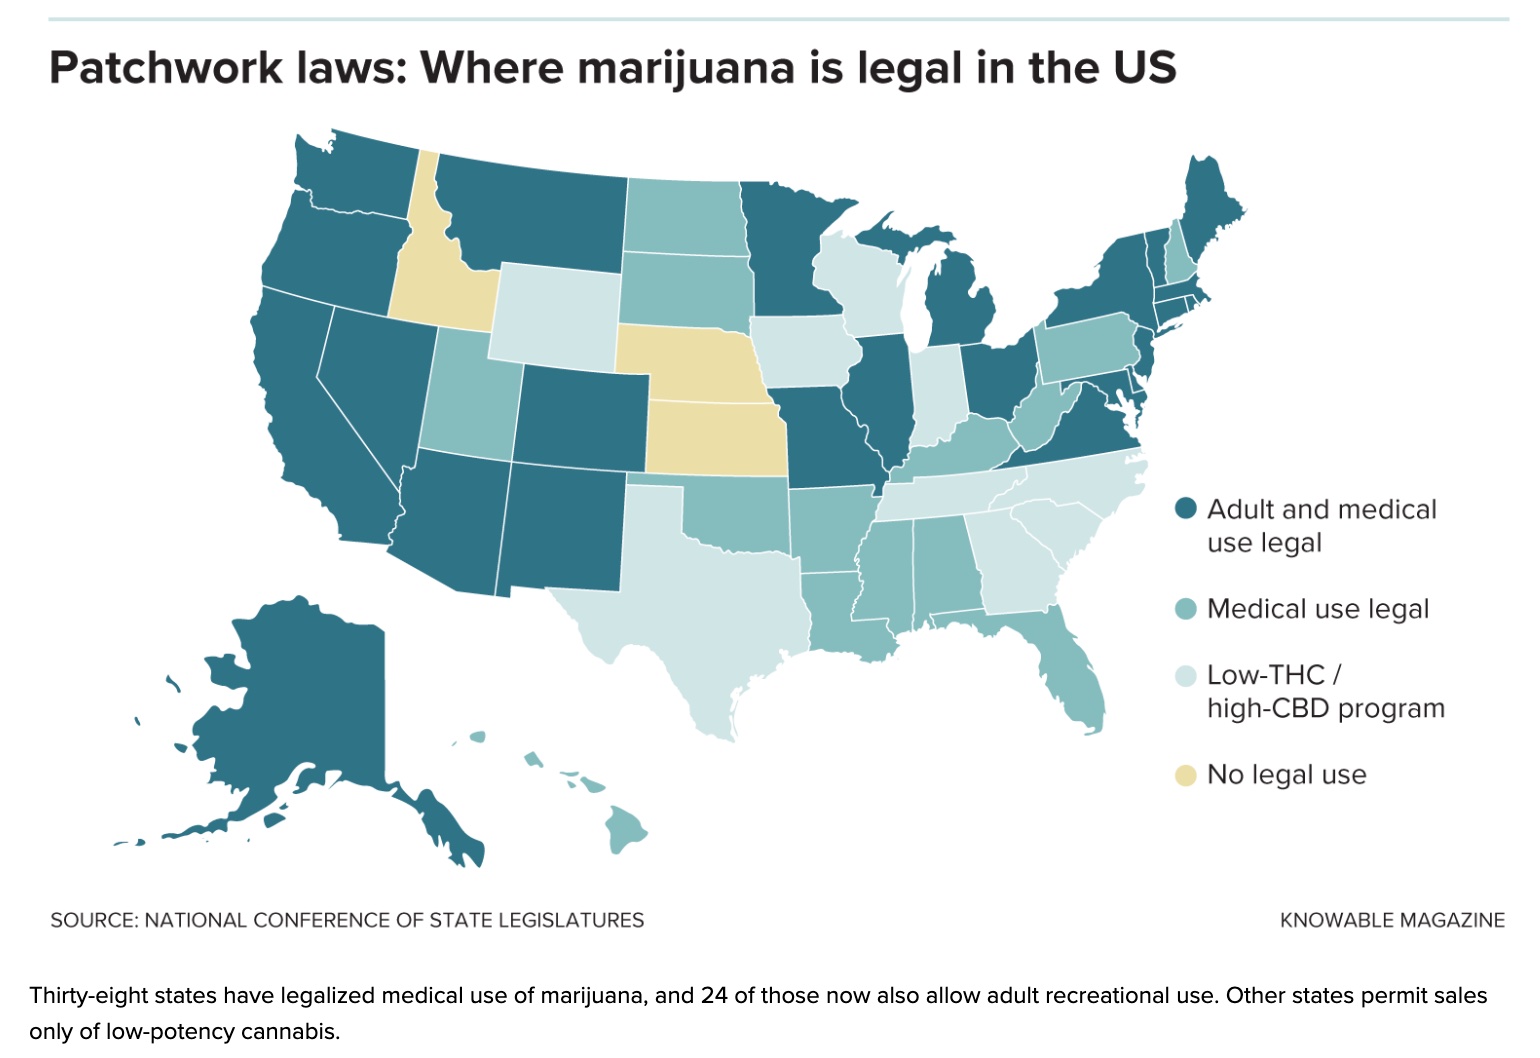 Map illustrating the legal status of marijuana across various states in the us, with different colors indicating regions where it's allowed for adult use, medically approved, restricted to low thc/high cbd, or completely illegal.